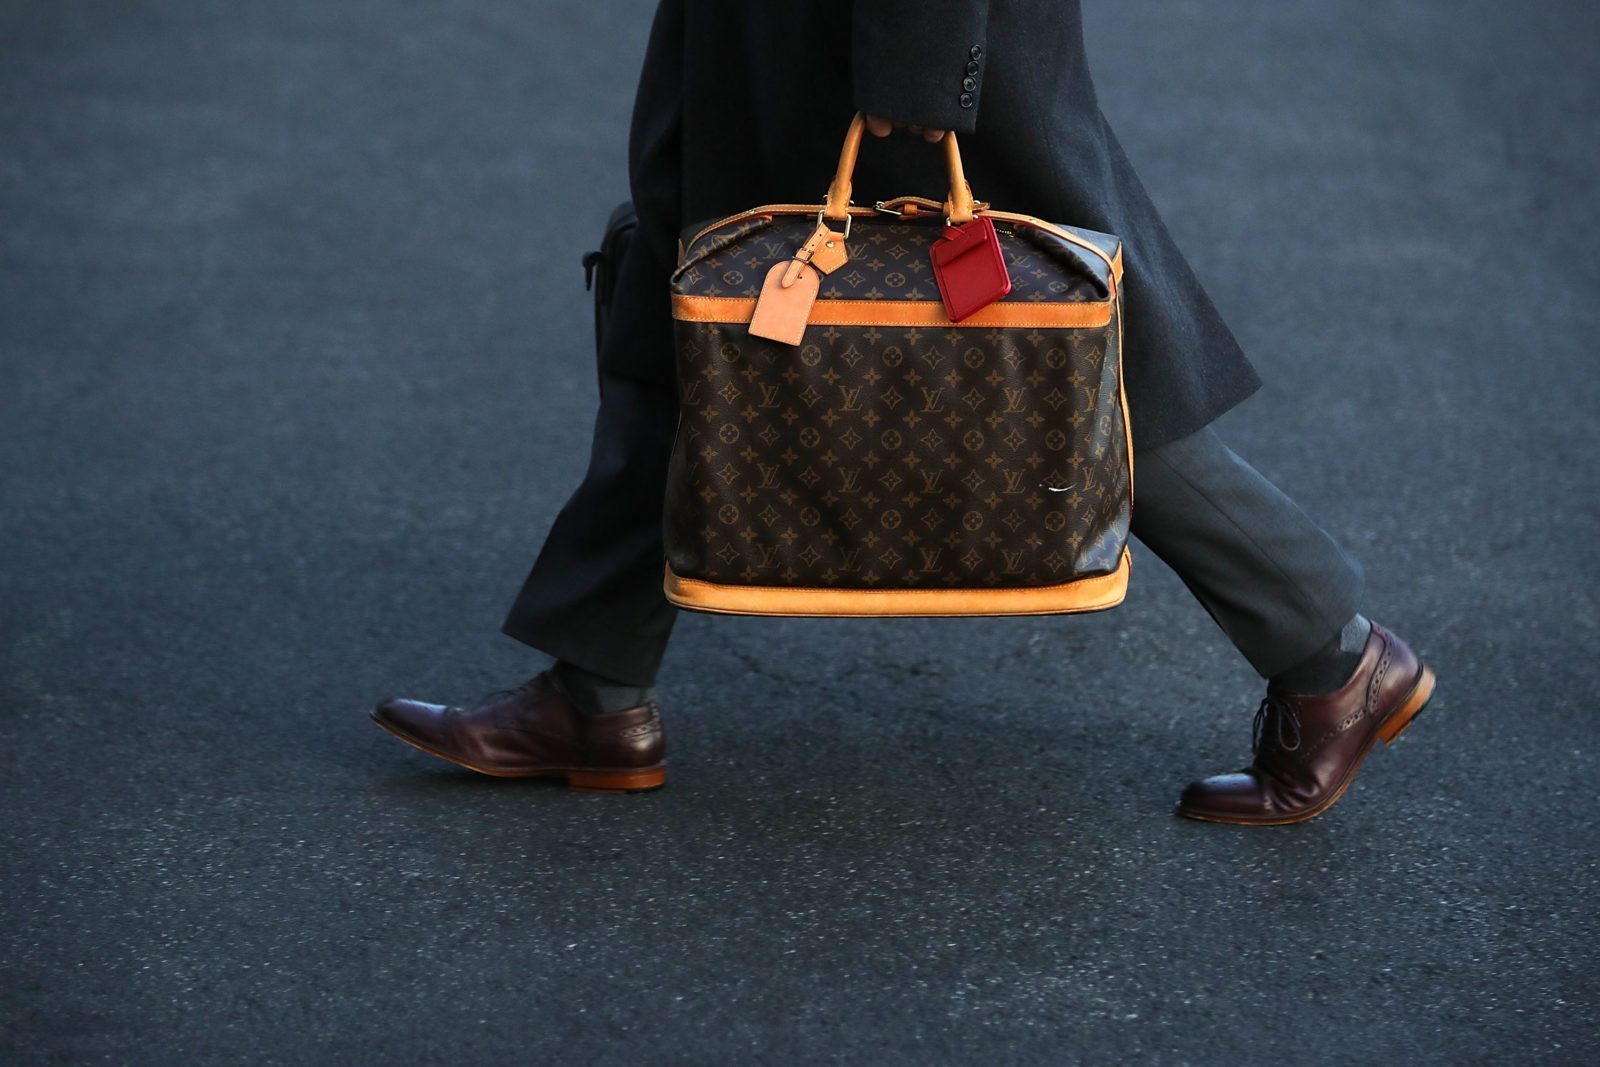 Man Refuses to Give Up His Louis Vuitton Bag at Gunpoint